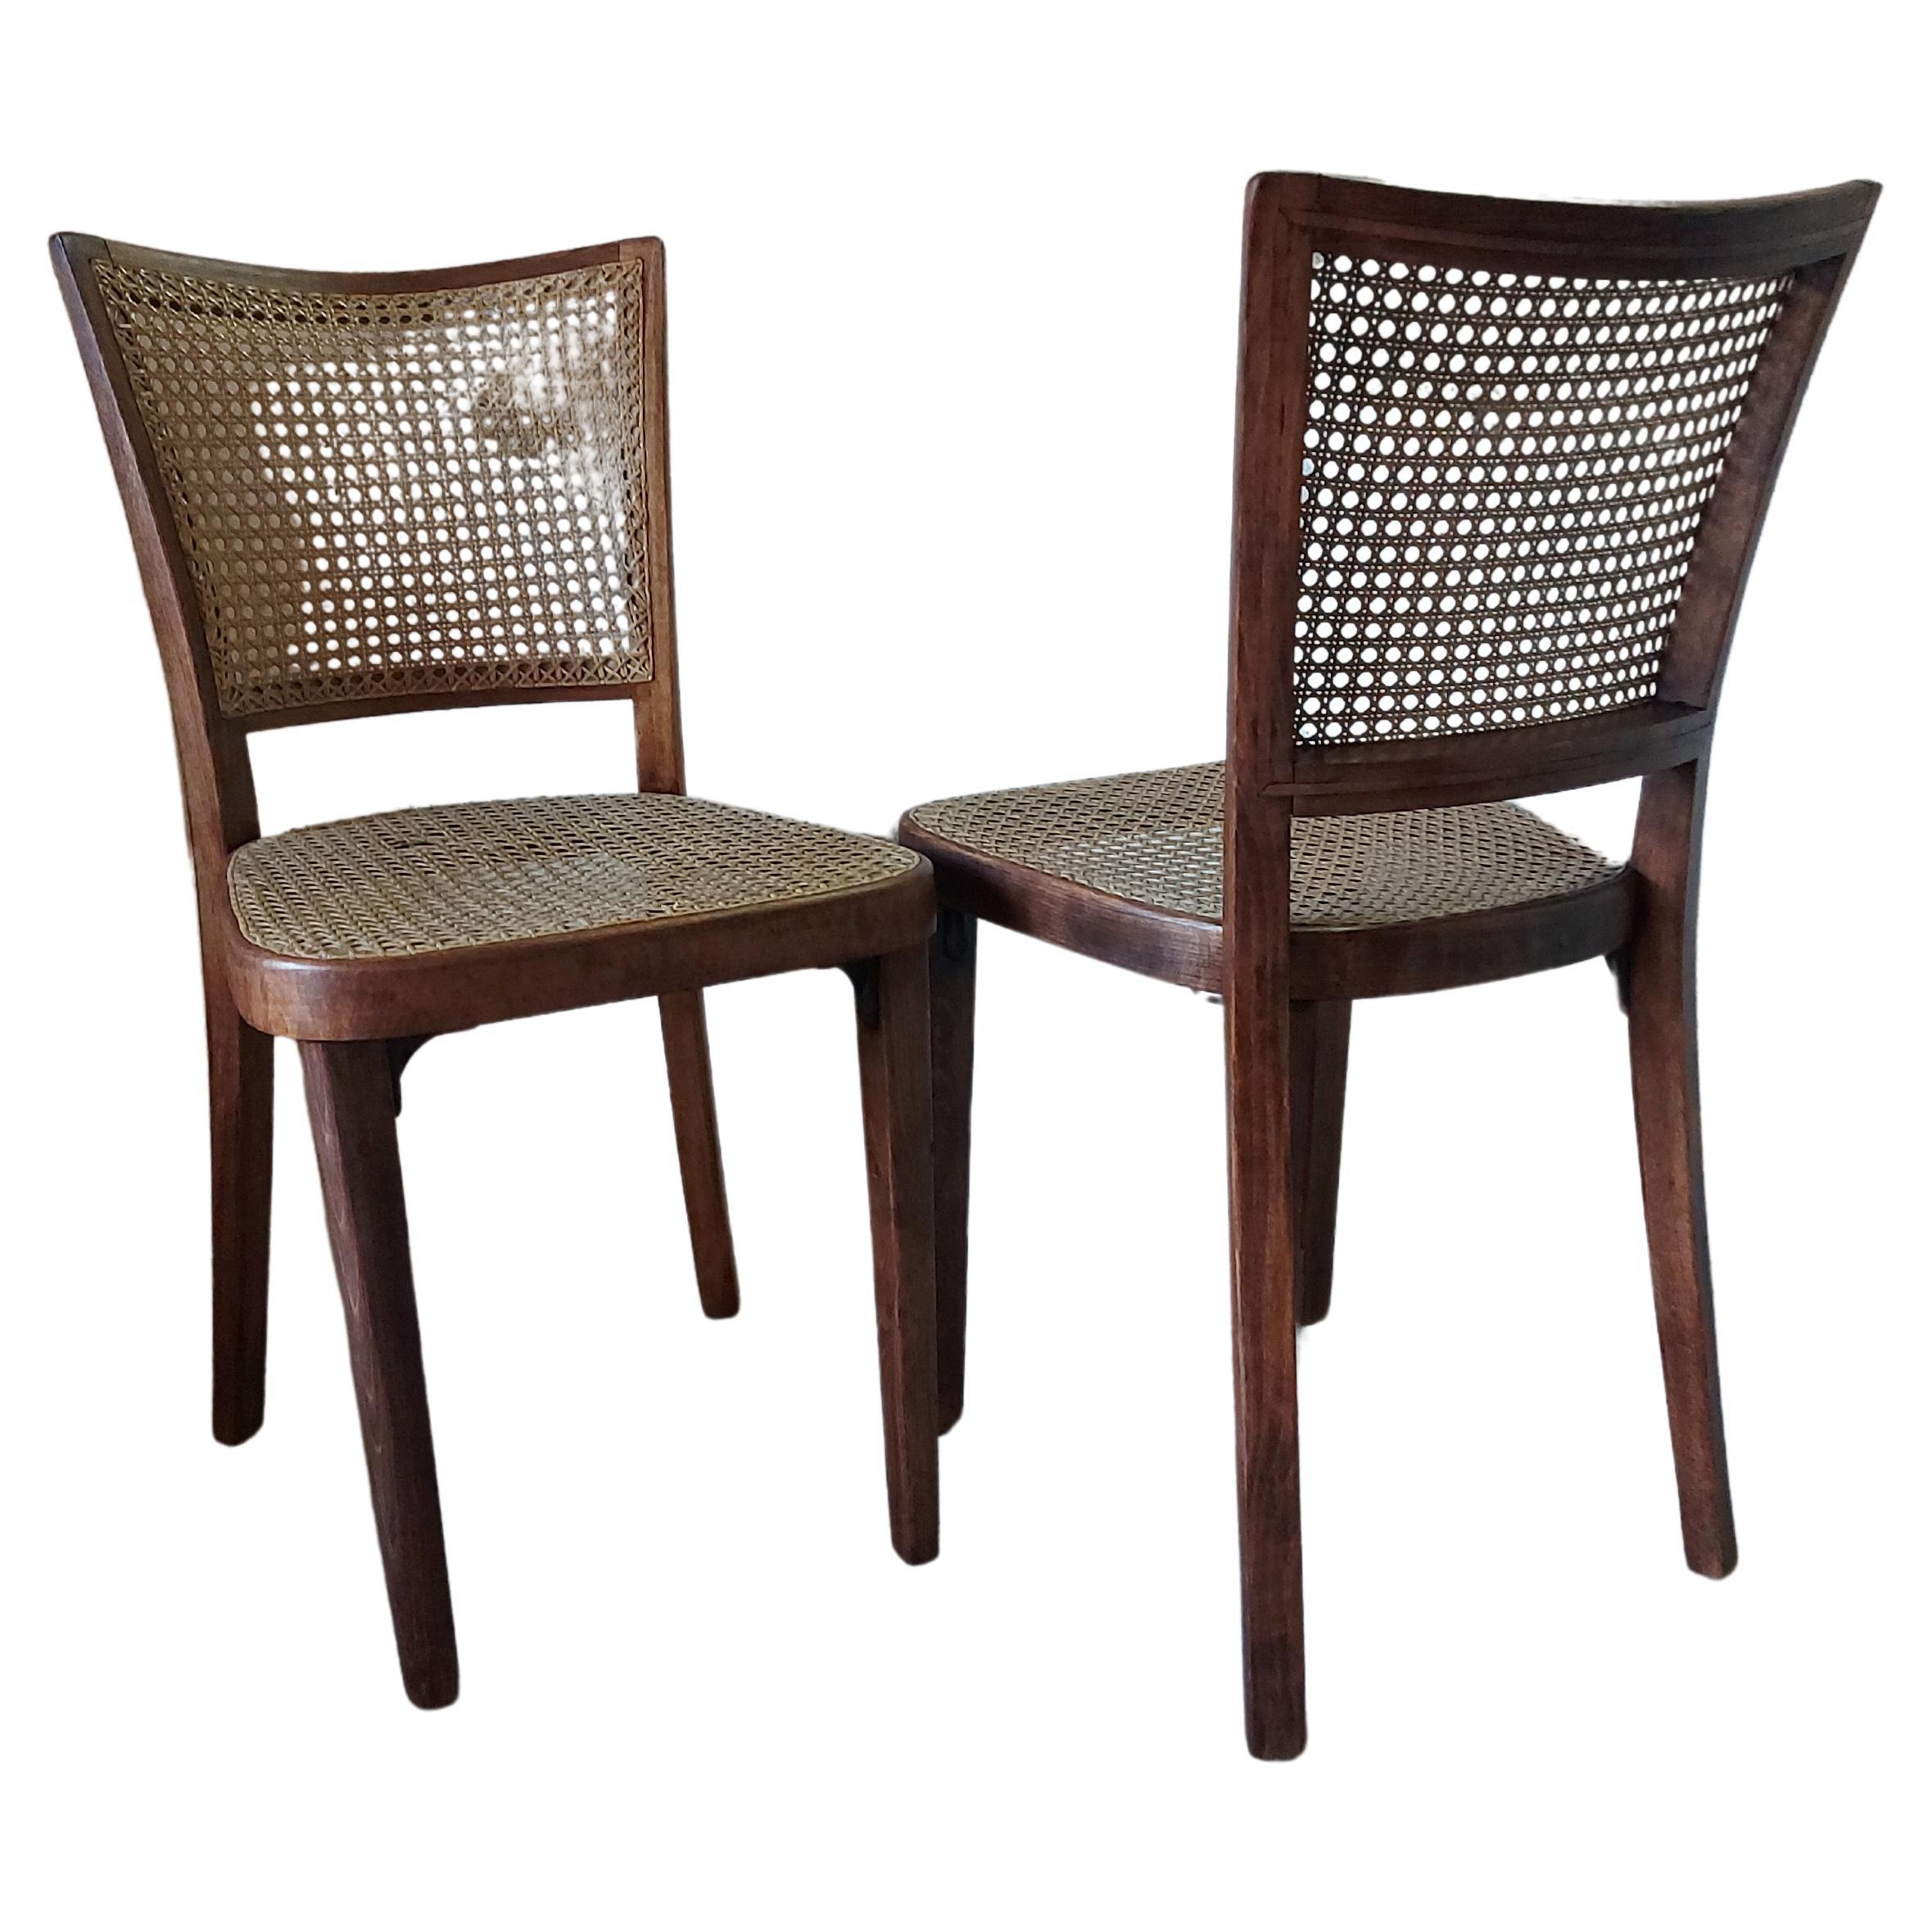 Bentwood cane 1930s pair For Sale